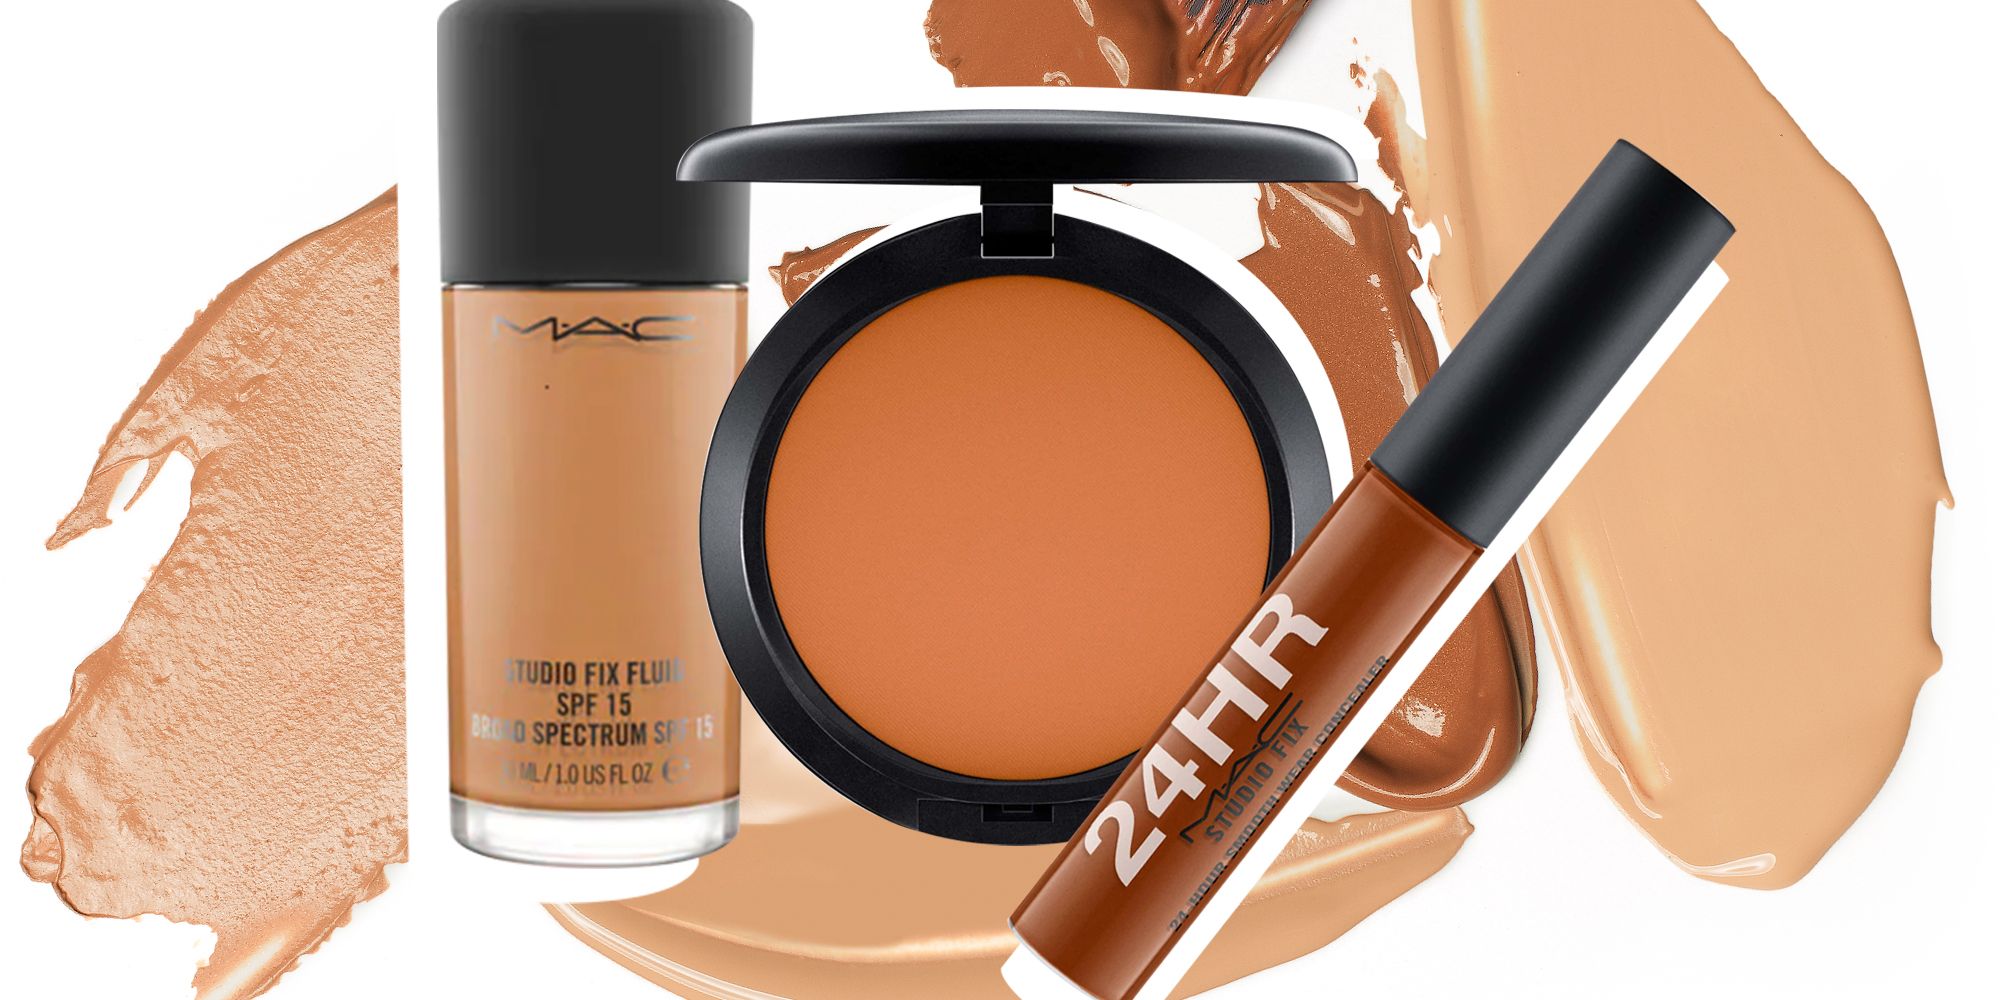 M.A.C. Cosmetics Expanded Their Fix Foundation and Concealer Shade